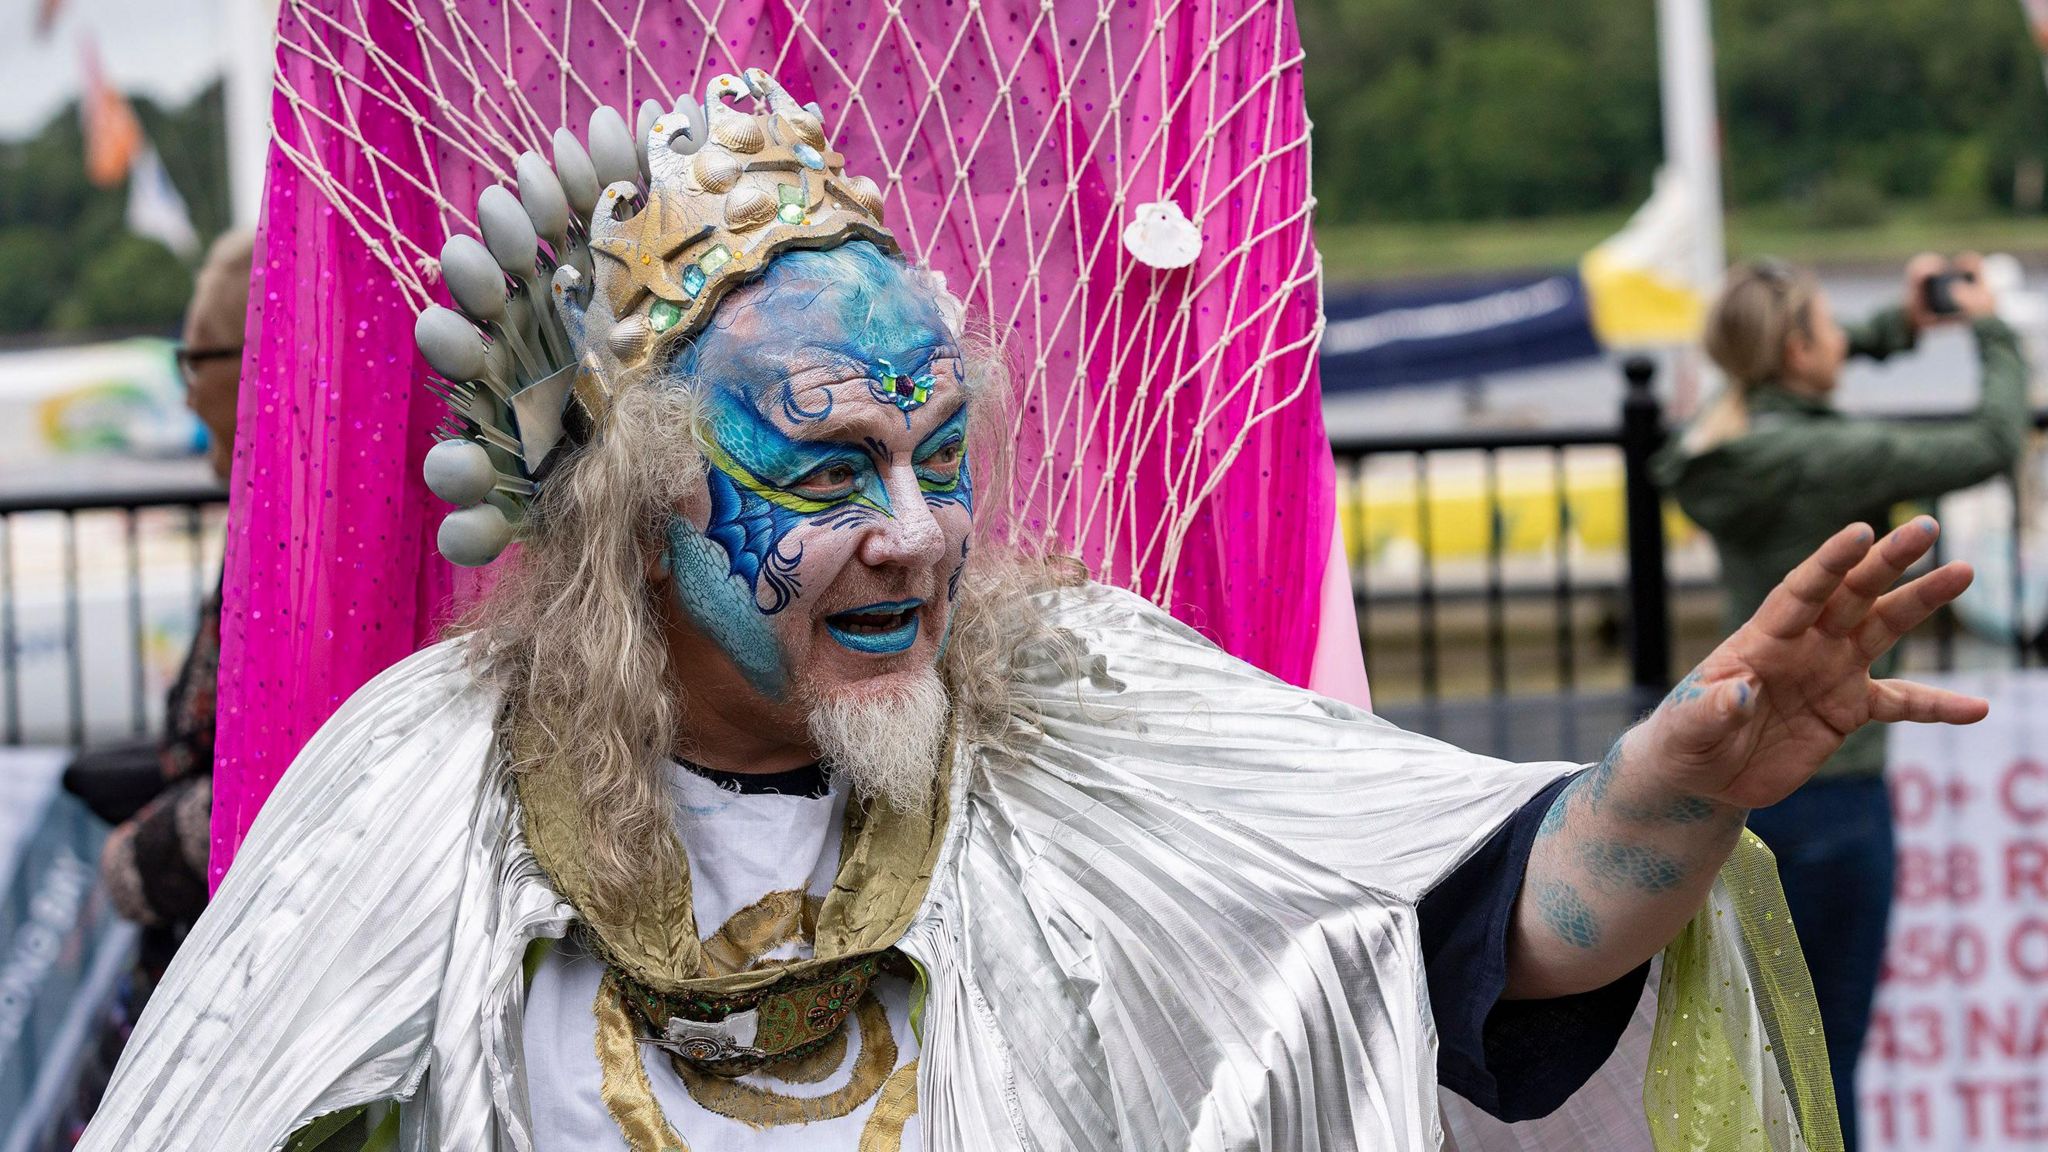 Man in god of the sea costume taking part in Derry's marime festival parade